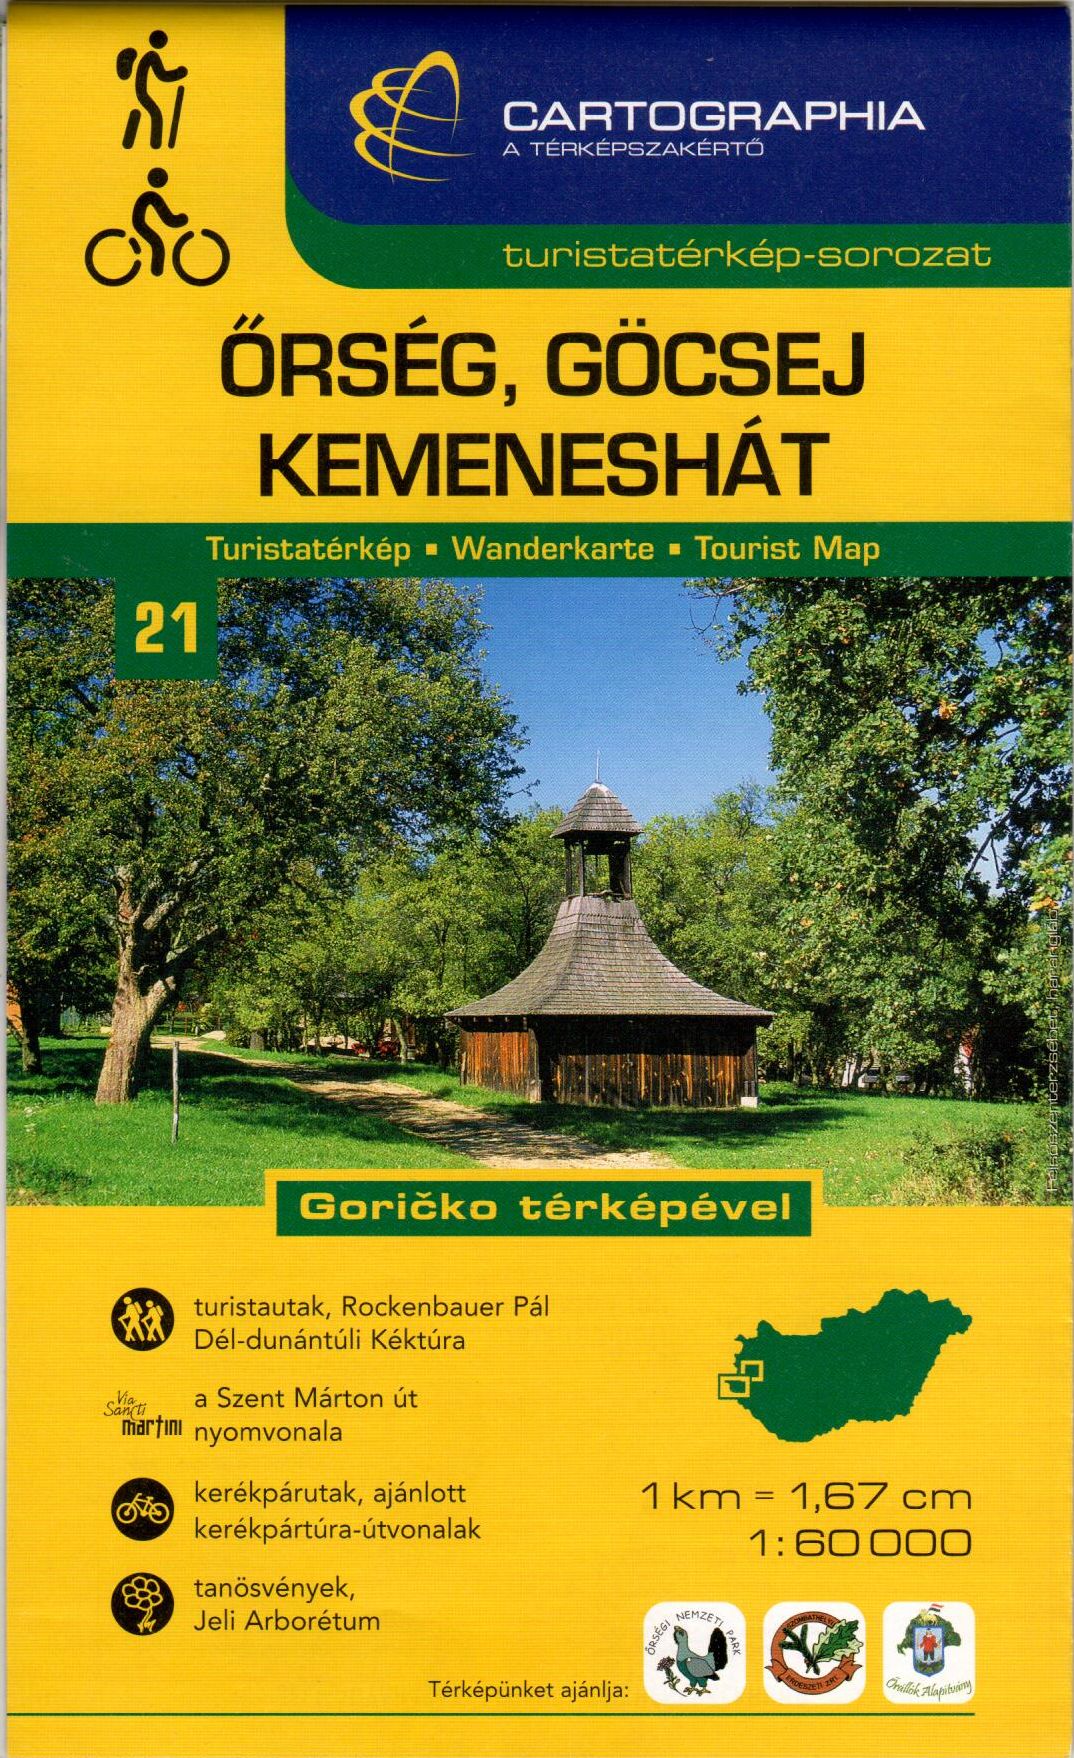 Two sided tourist map. Kemeneshát is on one side, and Őrség-Göcsej on the back of the map